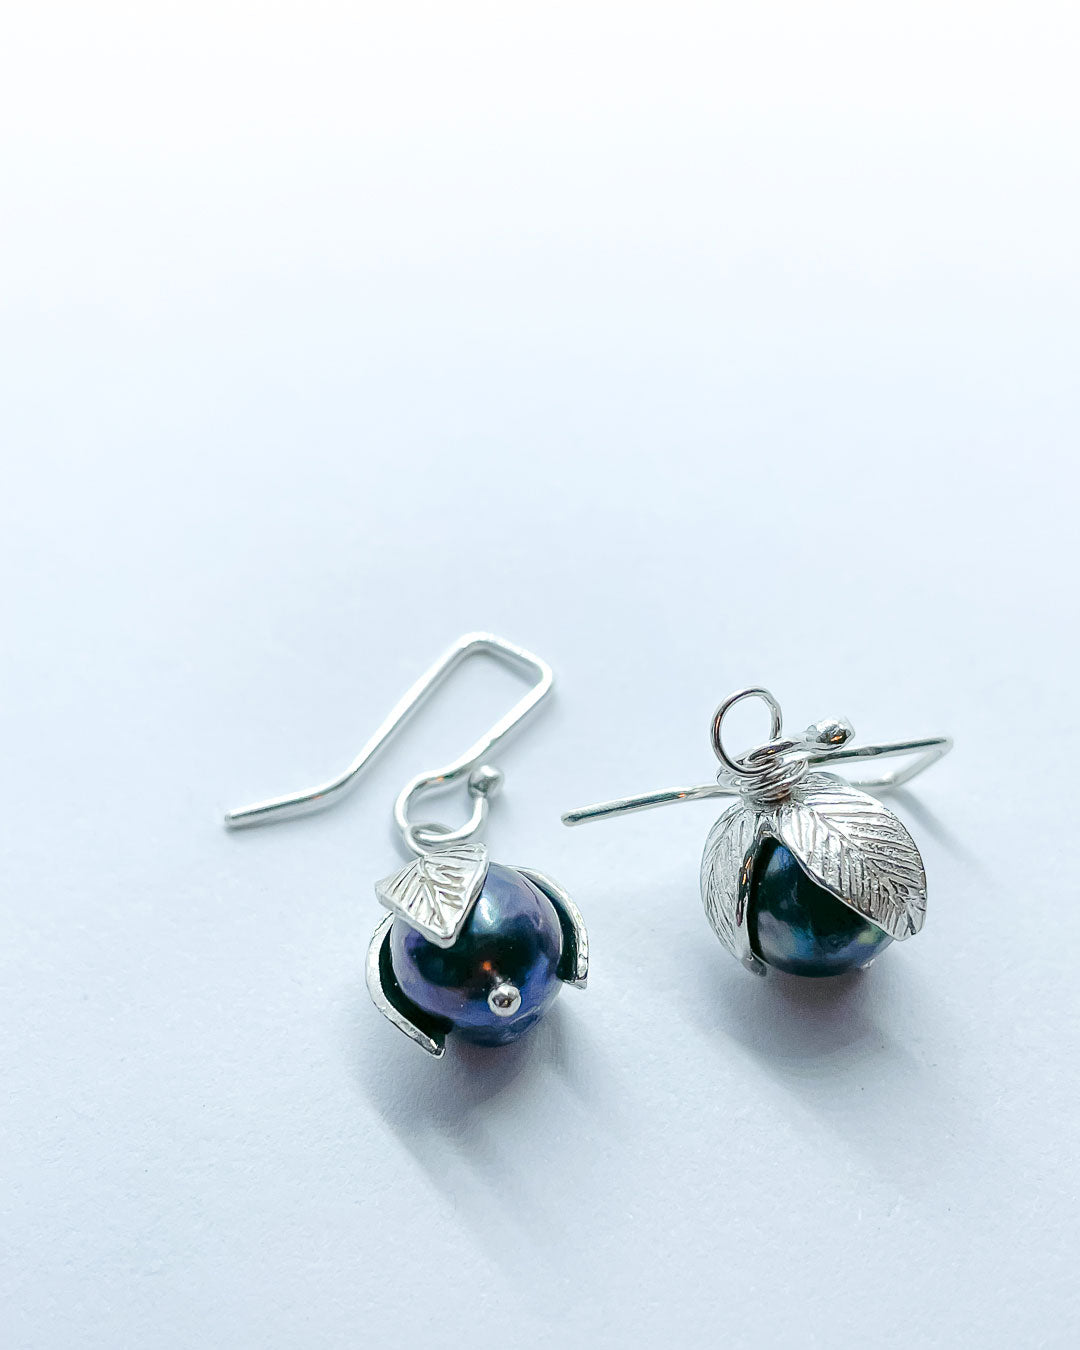 A pair of black pearls topped with Stylised leaves hung from artisan earring hooks